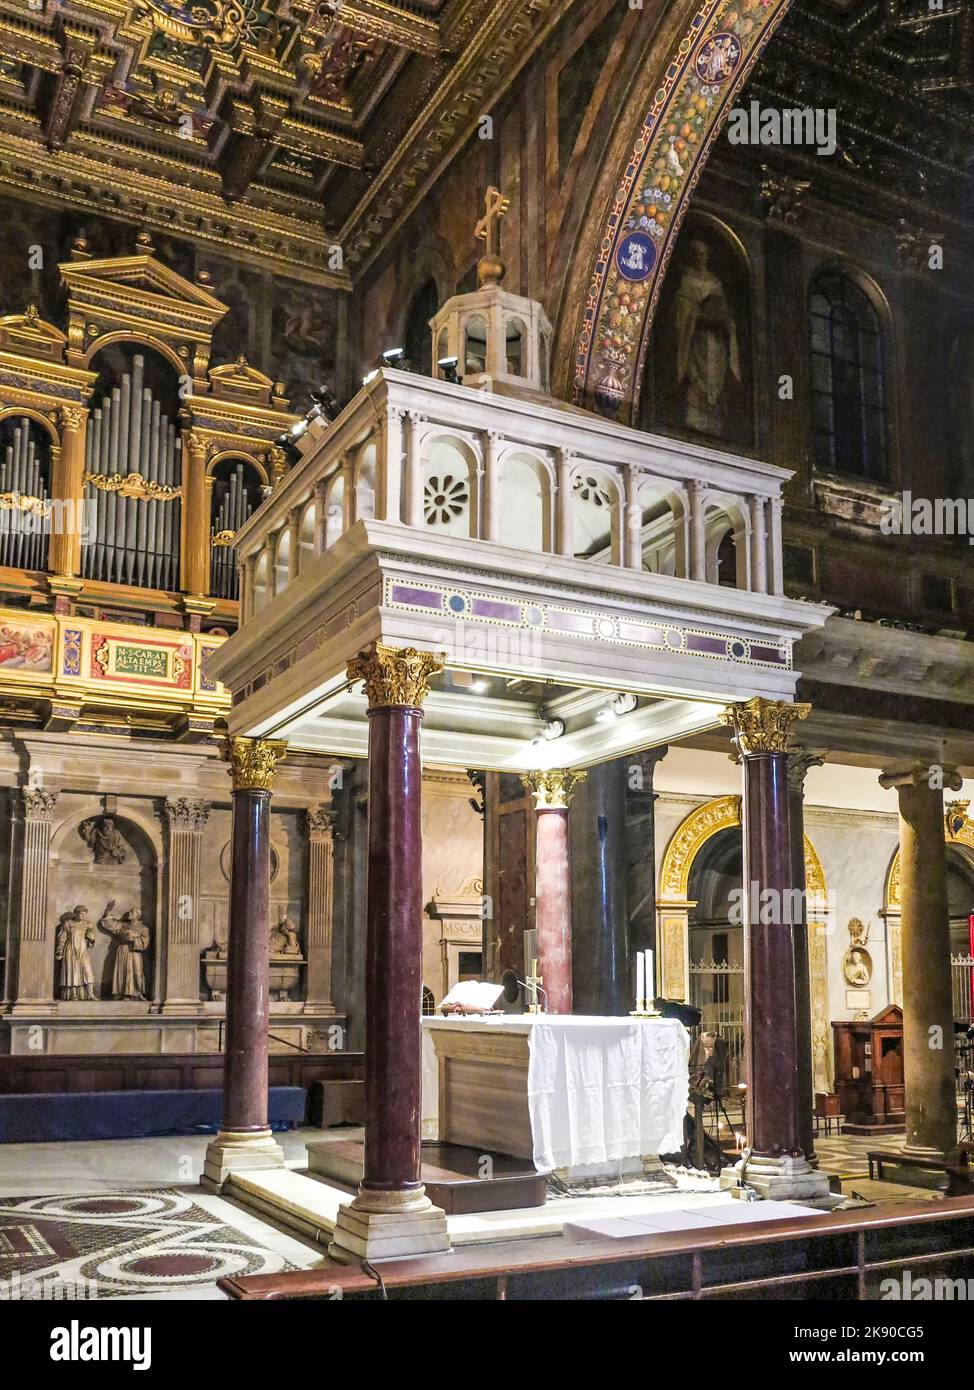 ROME, ITALY, DEC 23, 2015 : Altar space of the ancient basilica of Santa Maria in Trastevere, with ancient gilded mosaics. Stock Photo